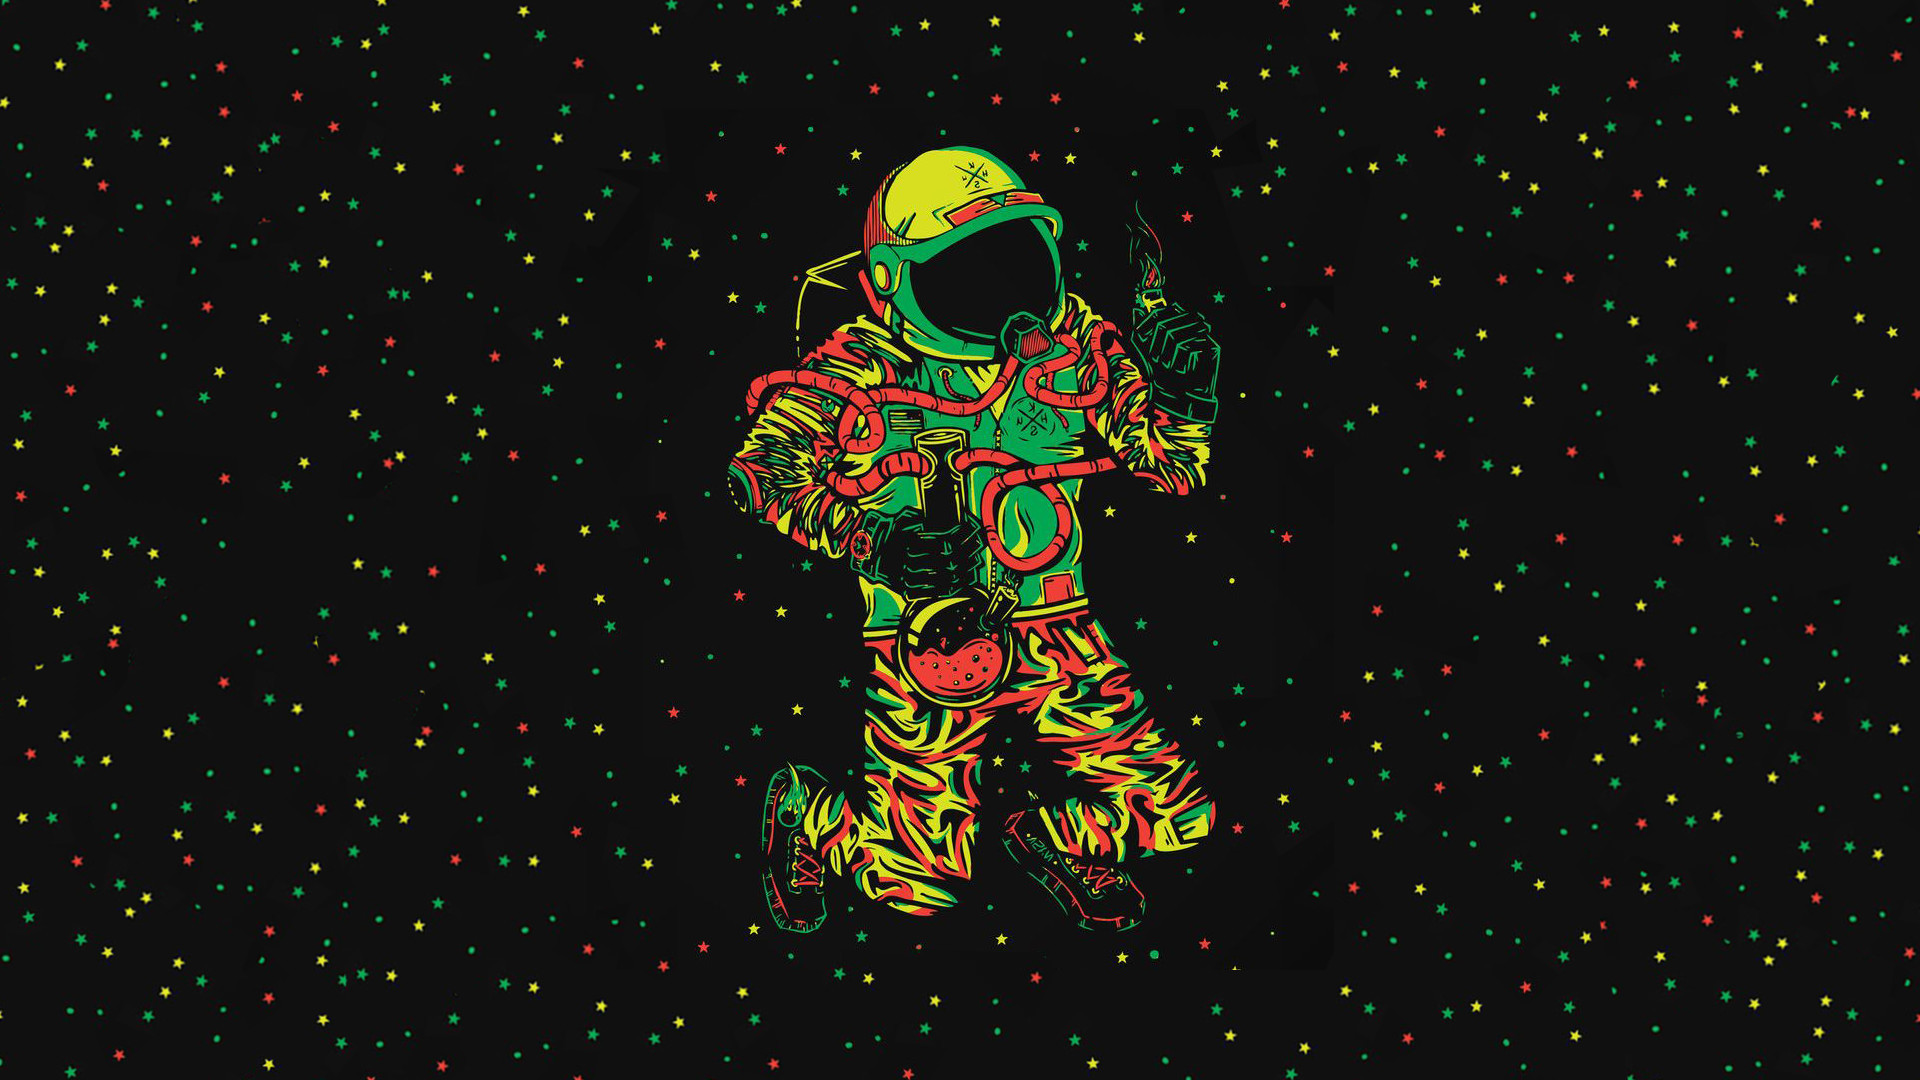 Trippy Astronaut Wallpapers posted by Samantha Cunningham.